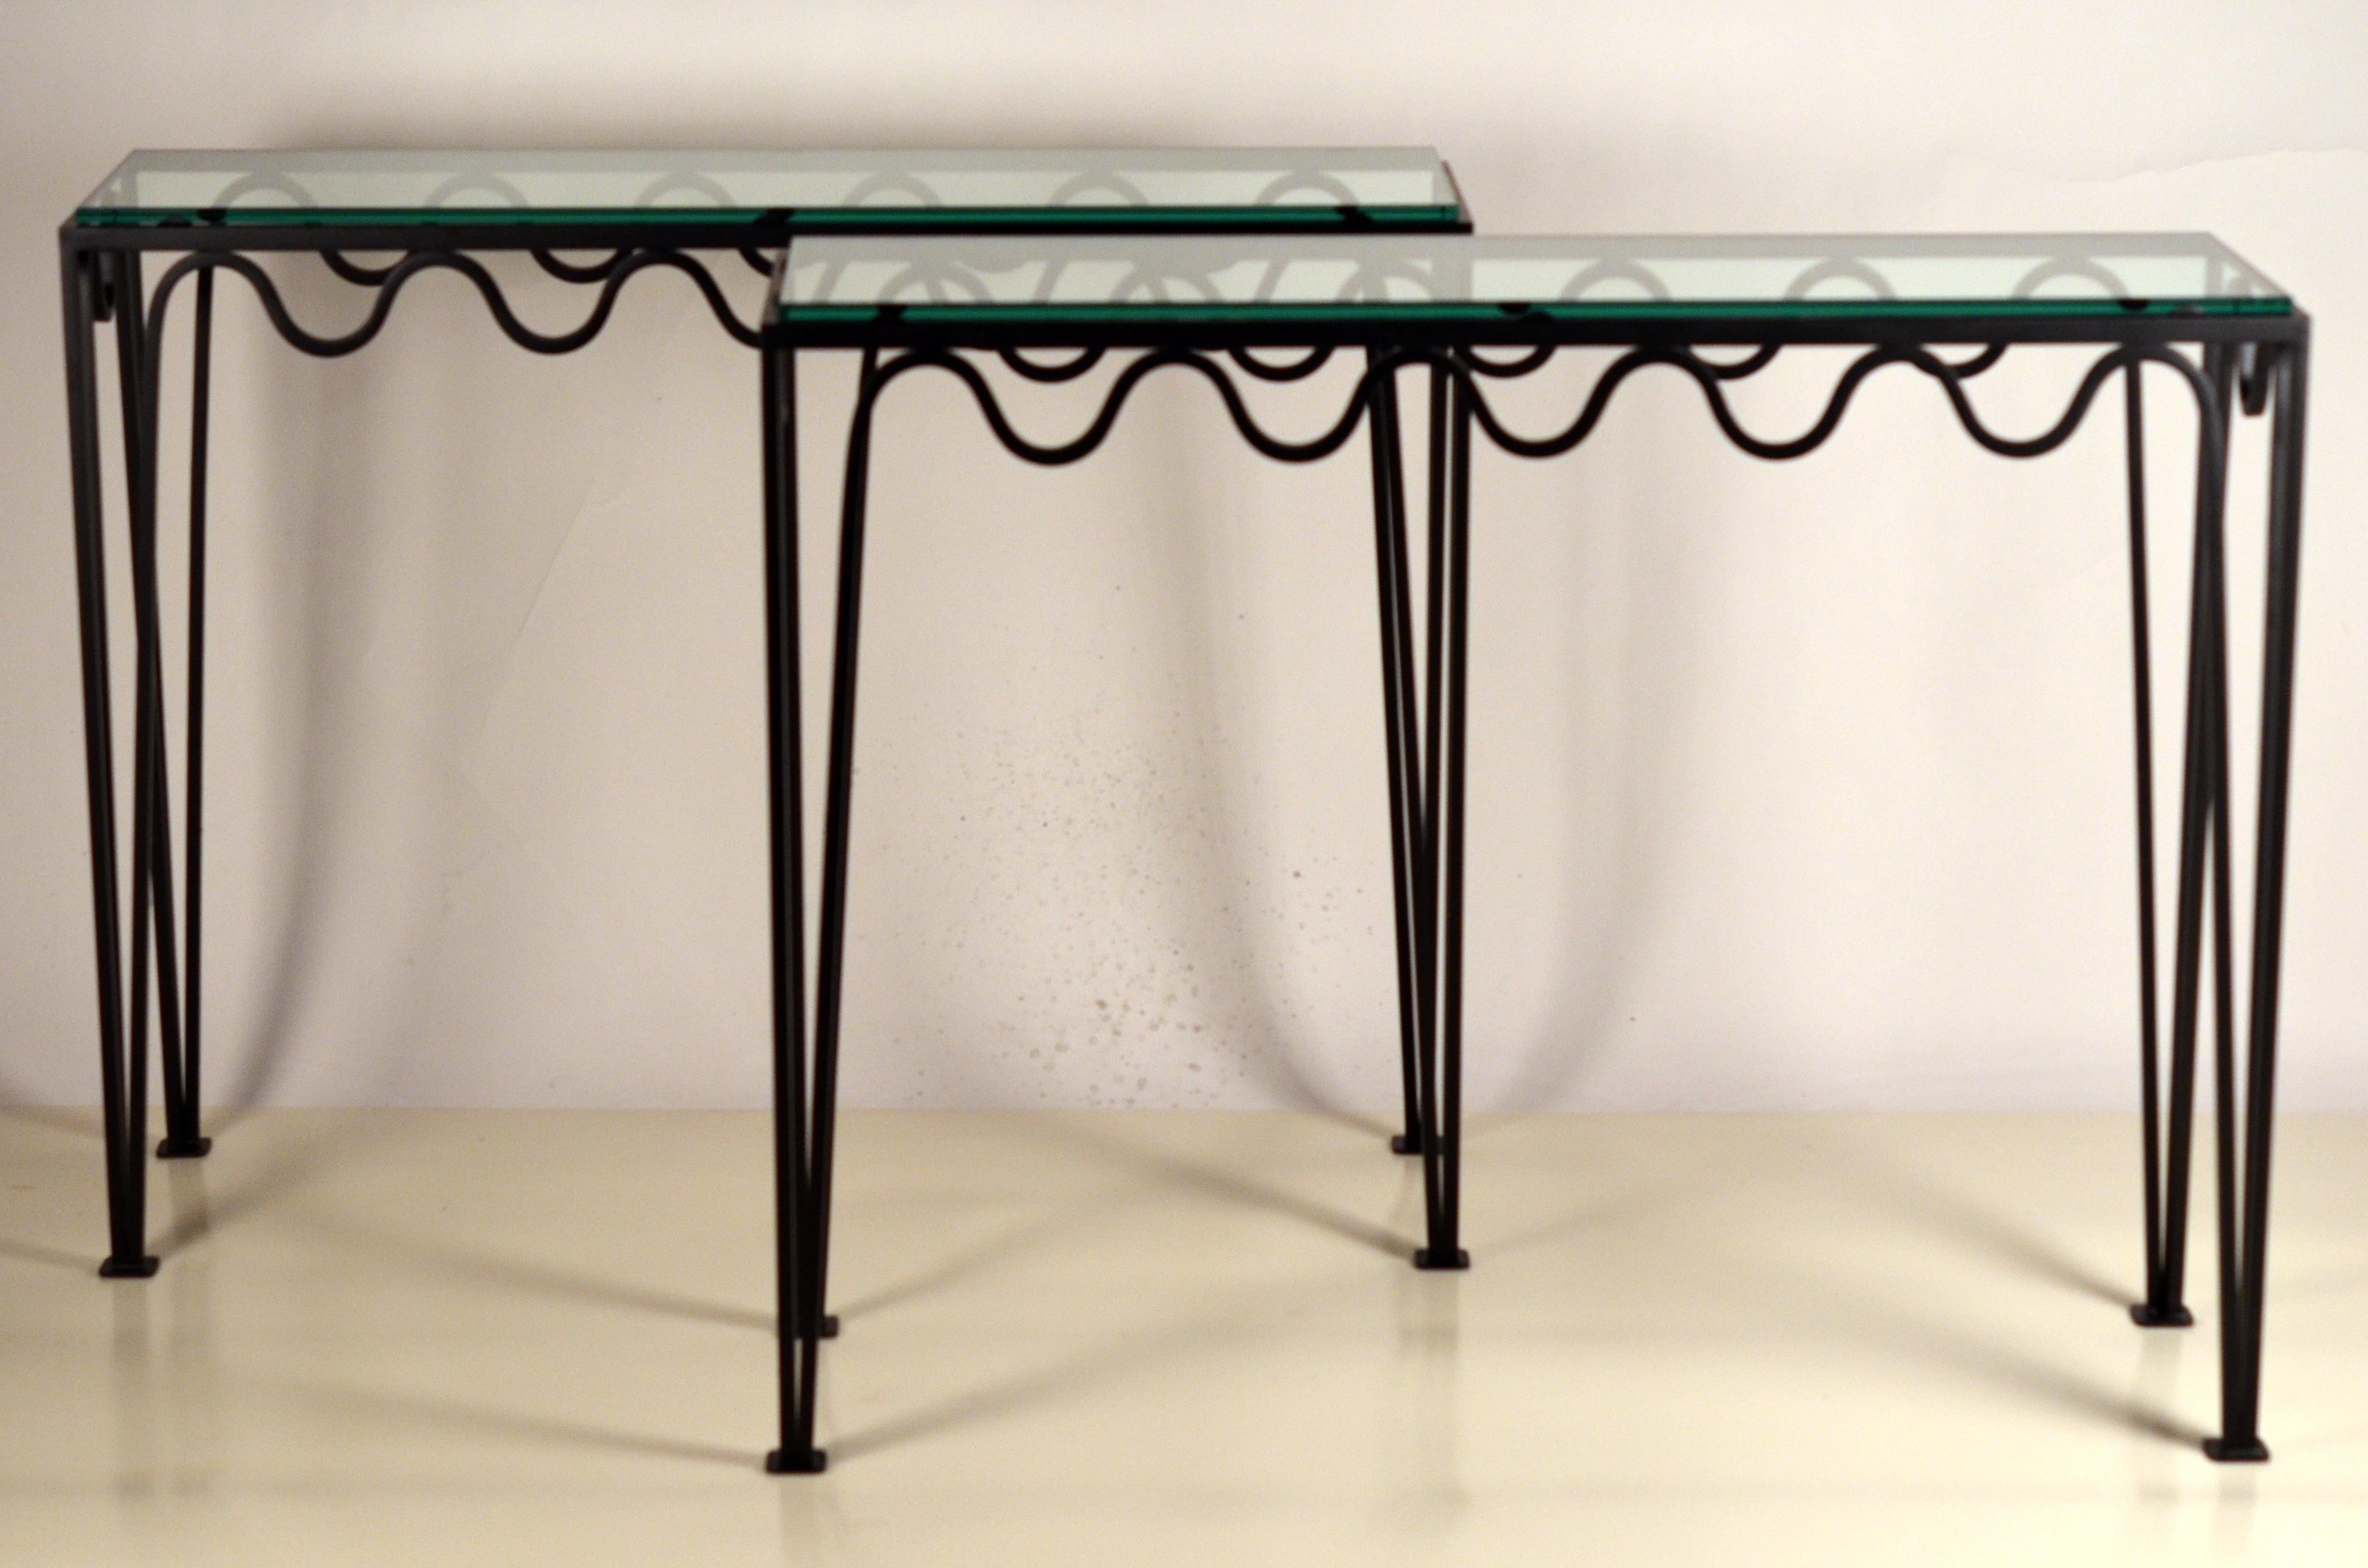 Pair of 'Méandre' undulating blackened wrought iron and glass consoles by DESIGN FRÈRES.

Chic and understated.